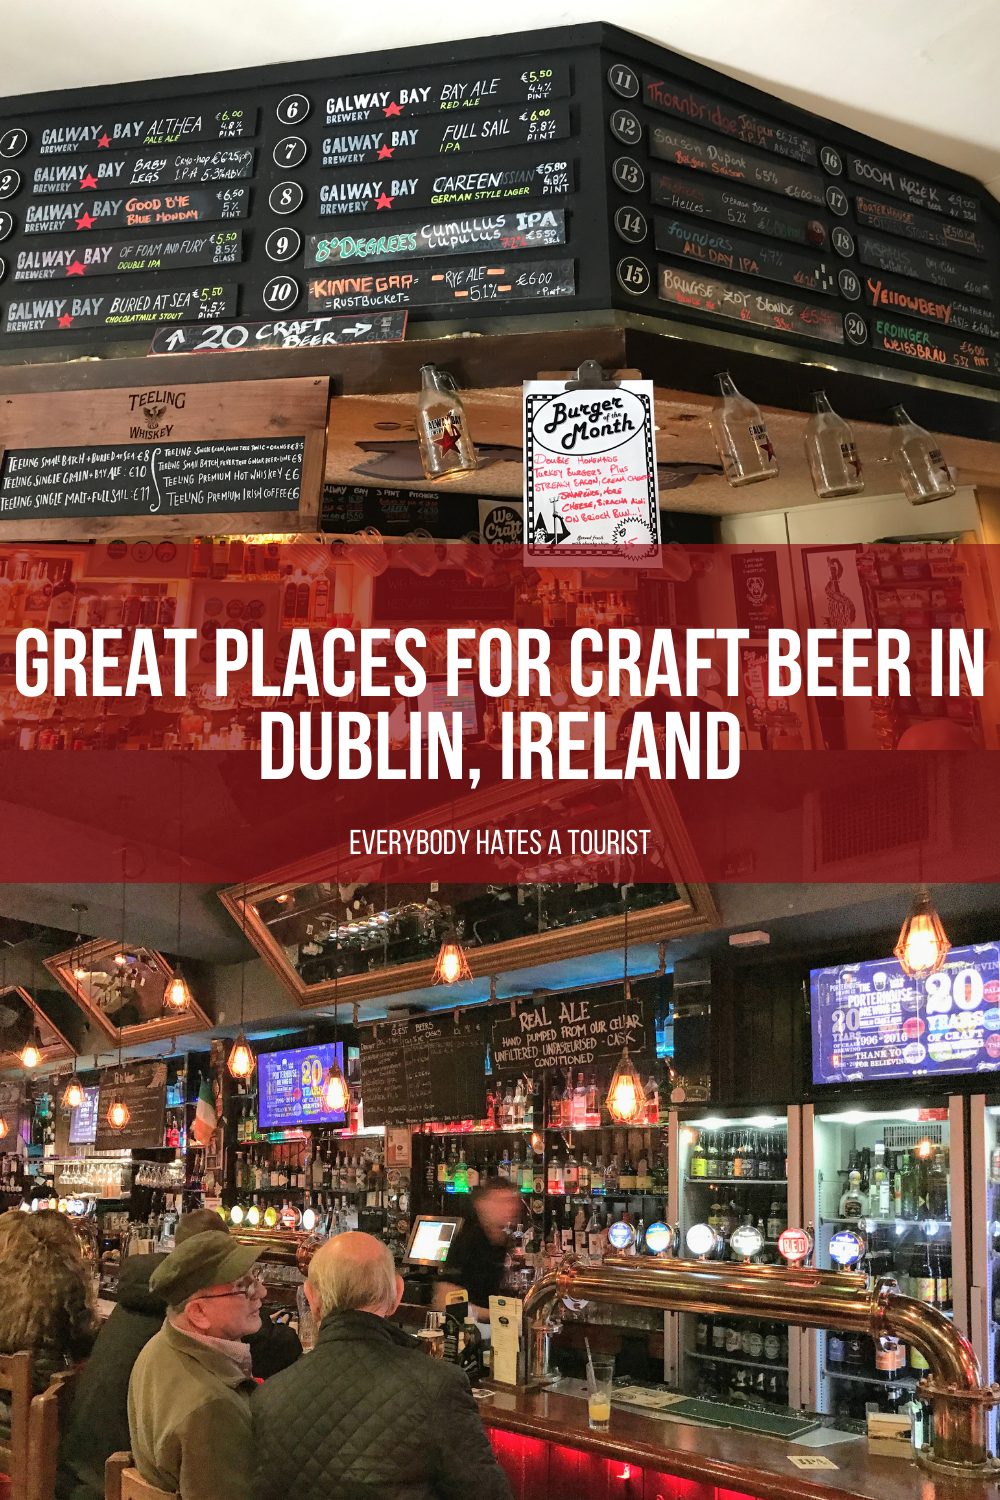 great places for craft beer in dublin ireland - 19 great places for craft beer in Dublin, Ireland